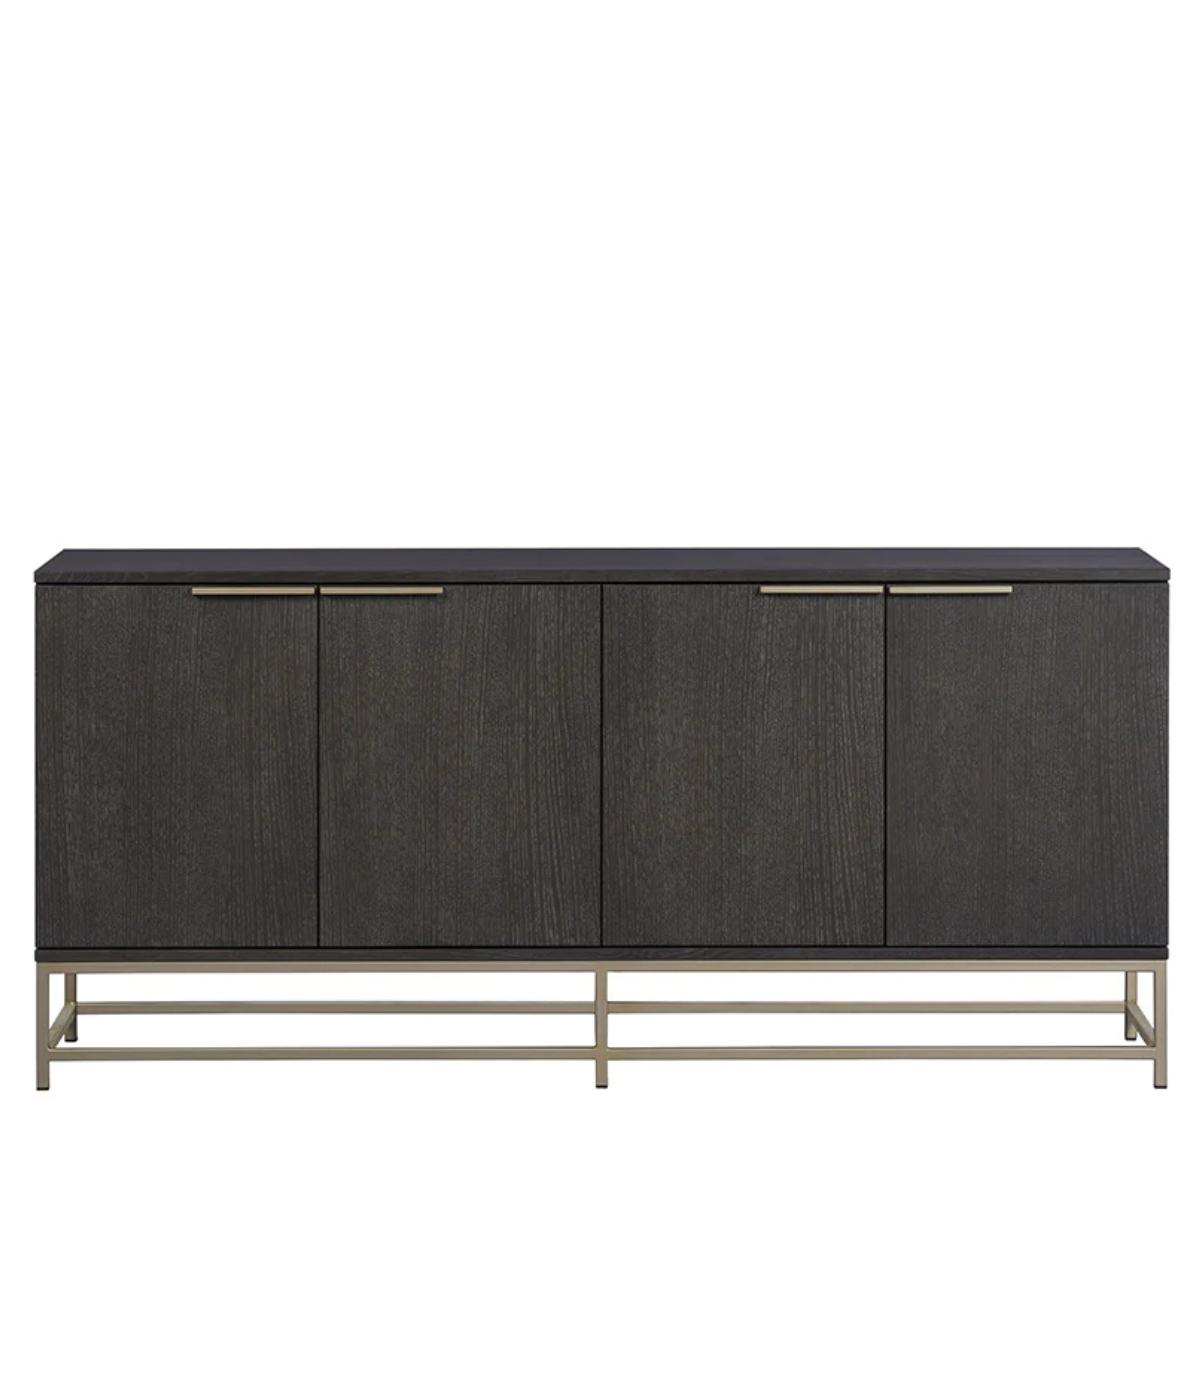 Grand buffet Rebel - Gris anthracite